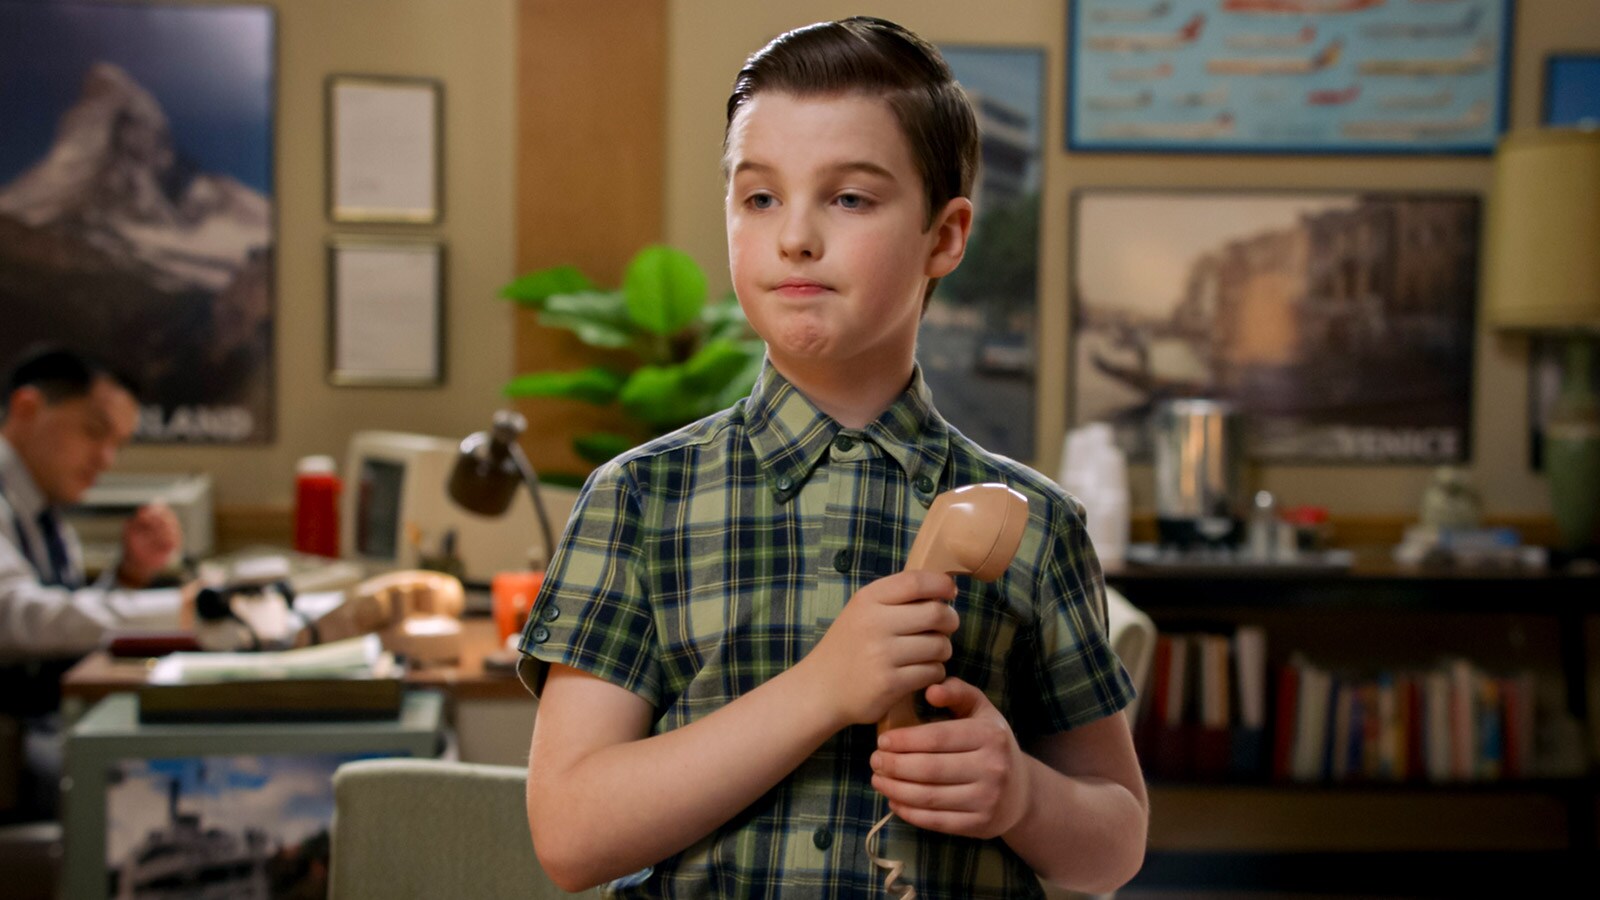 The Big Bang Theory: Young Sheldon has revealed the true villain of the franchise